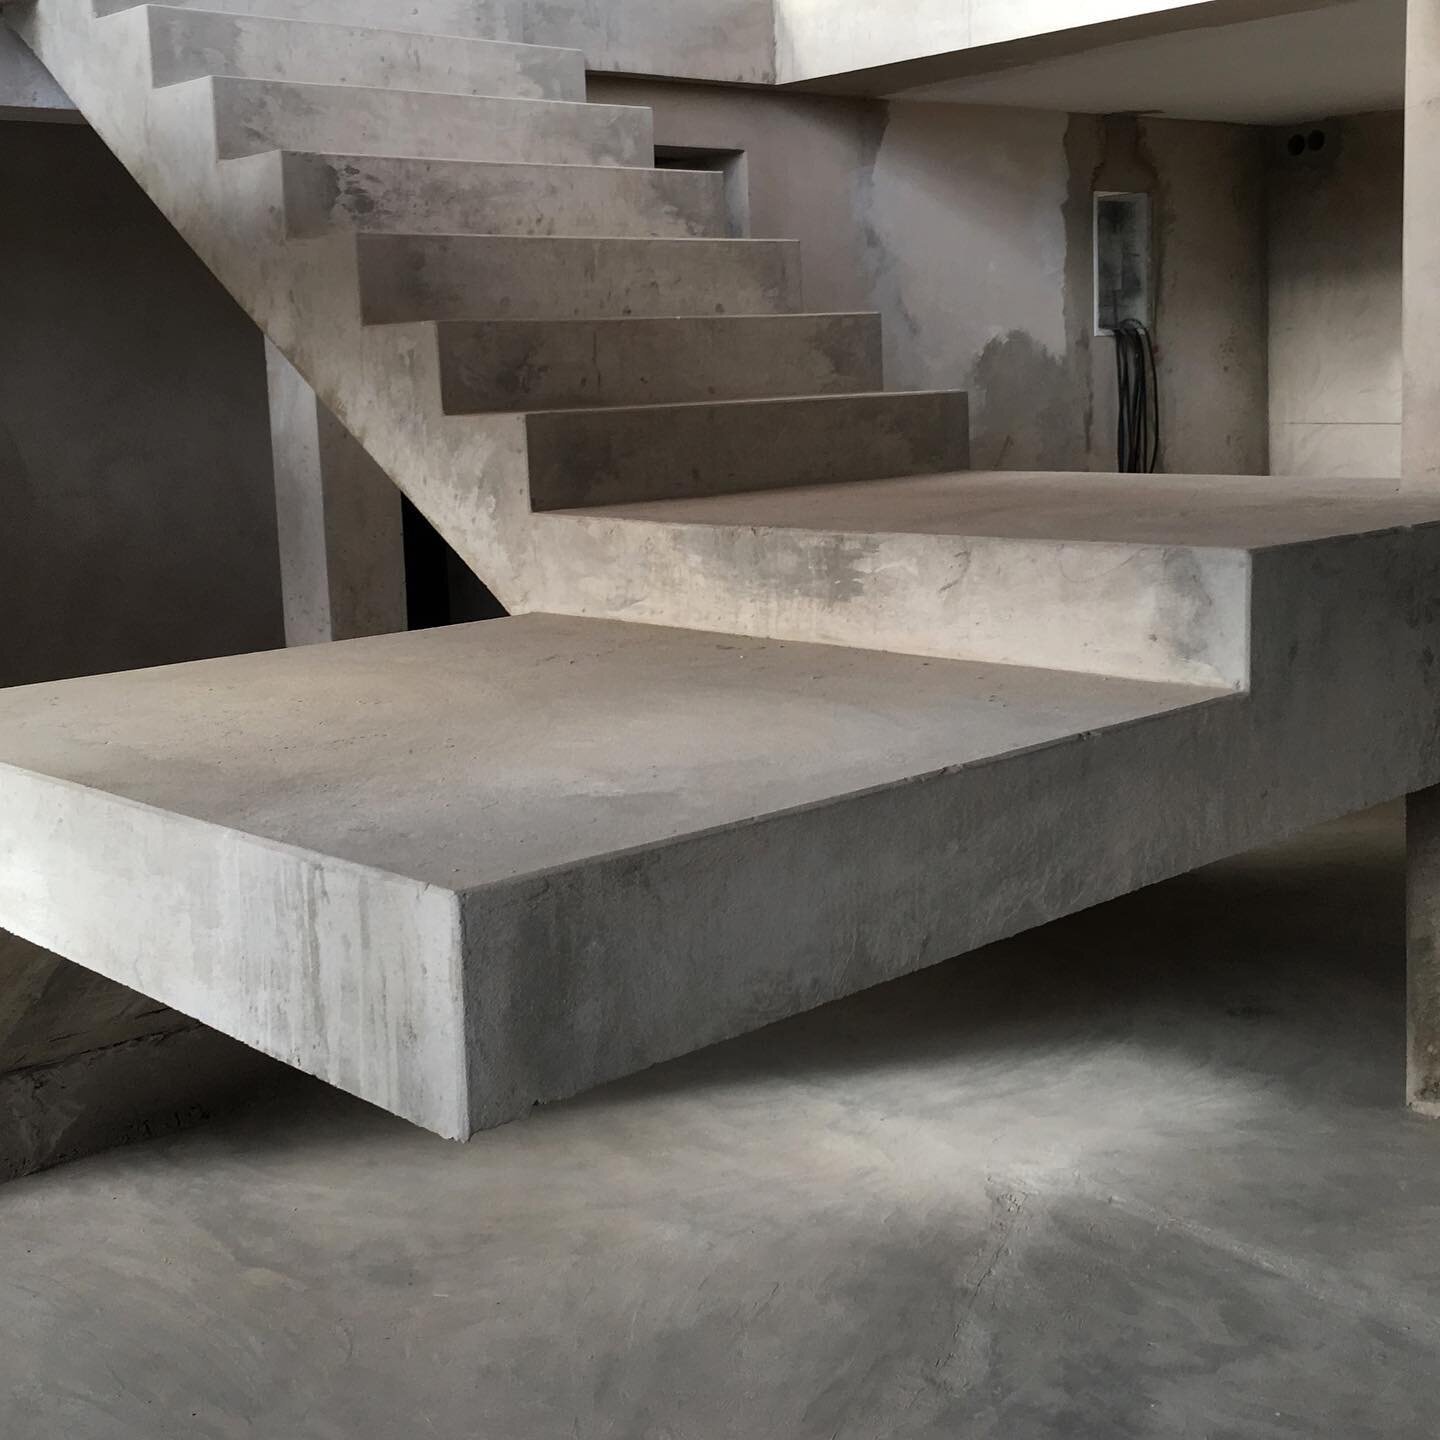 Floating concrete staircase from another angle...